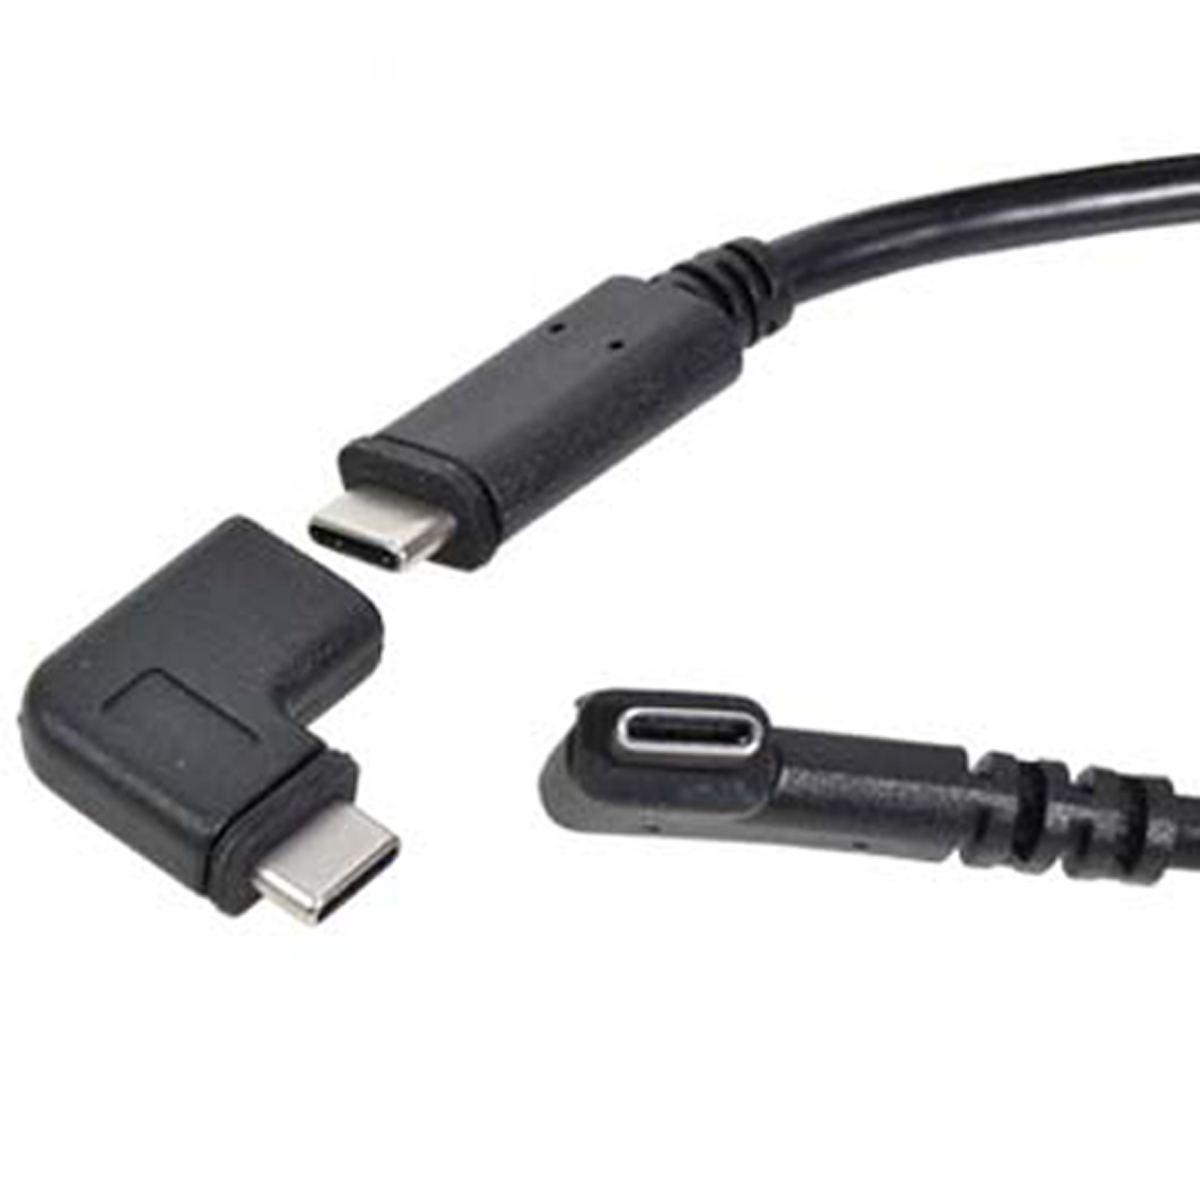 90° K-Link USB Cable - 10 feet 